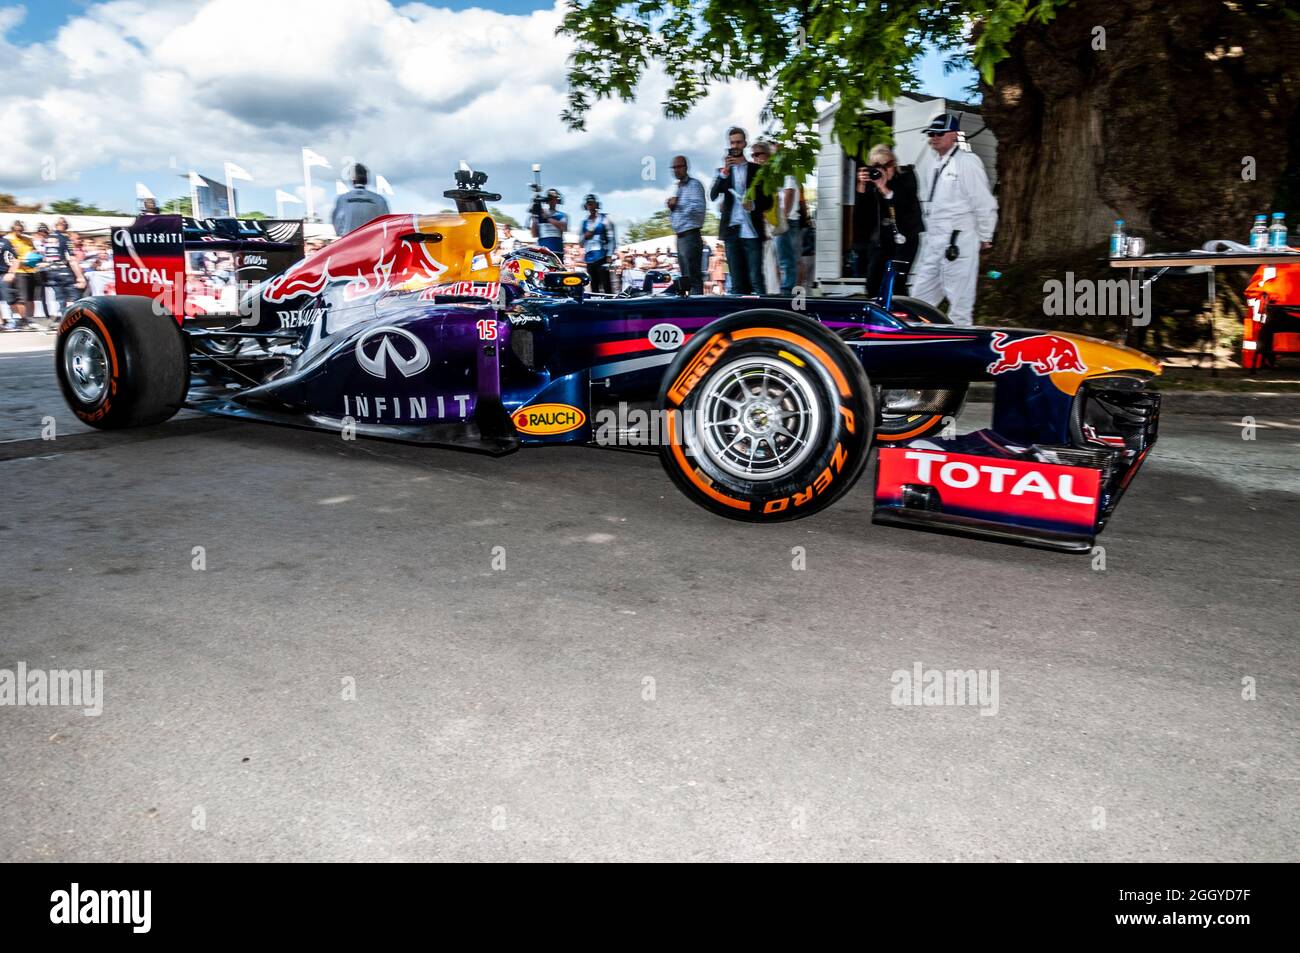 Red Bull RB7 Formula 1, Grand Prix racing car at the Goodwood Festival of Speed motor racing event 2014, leaving the assembly area for the track Stock Photo